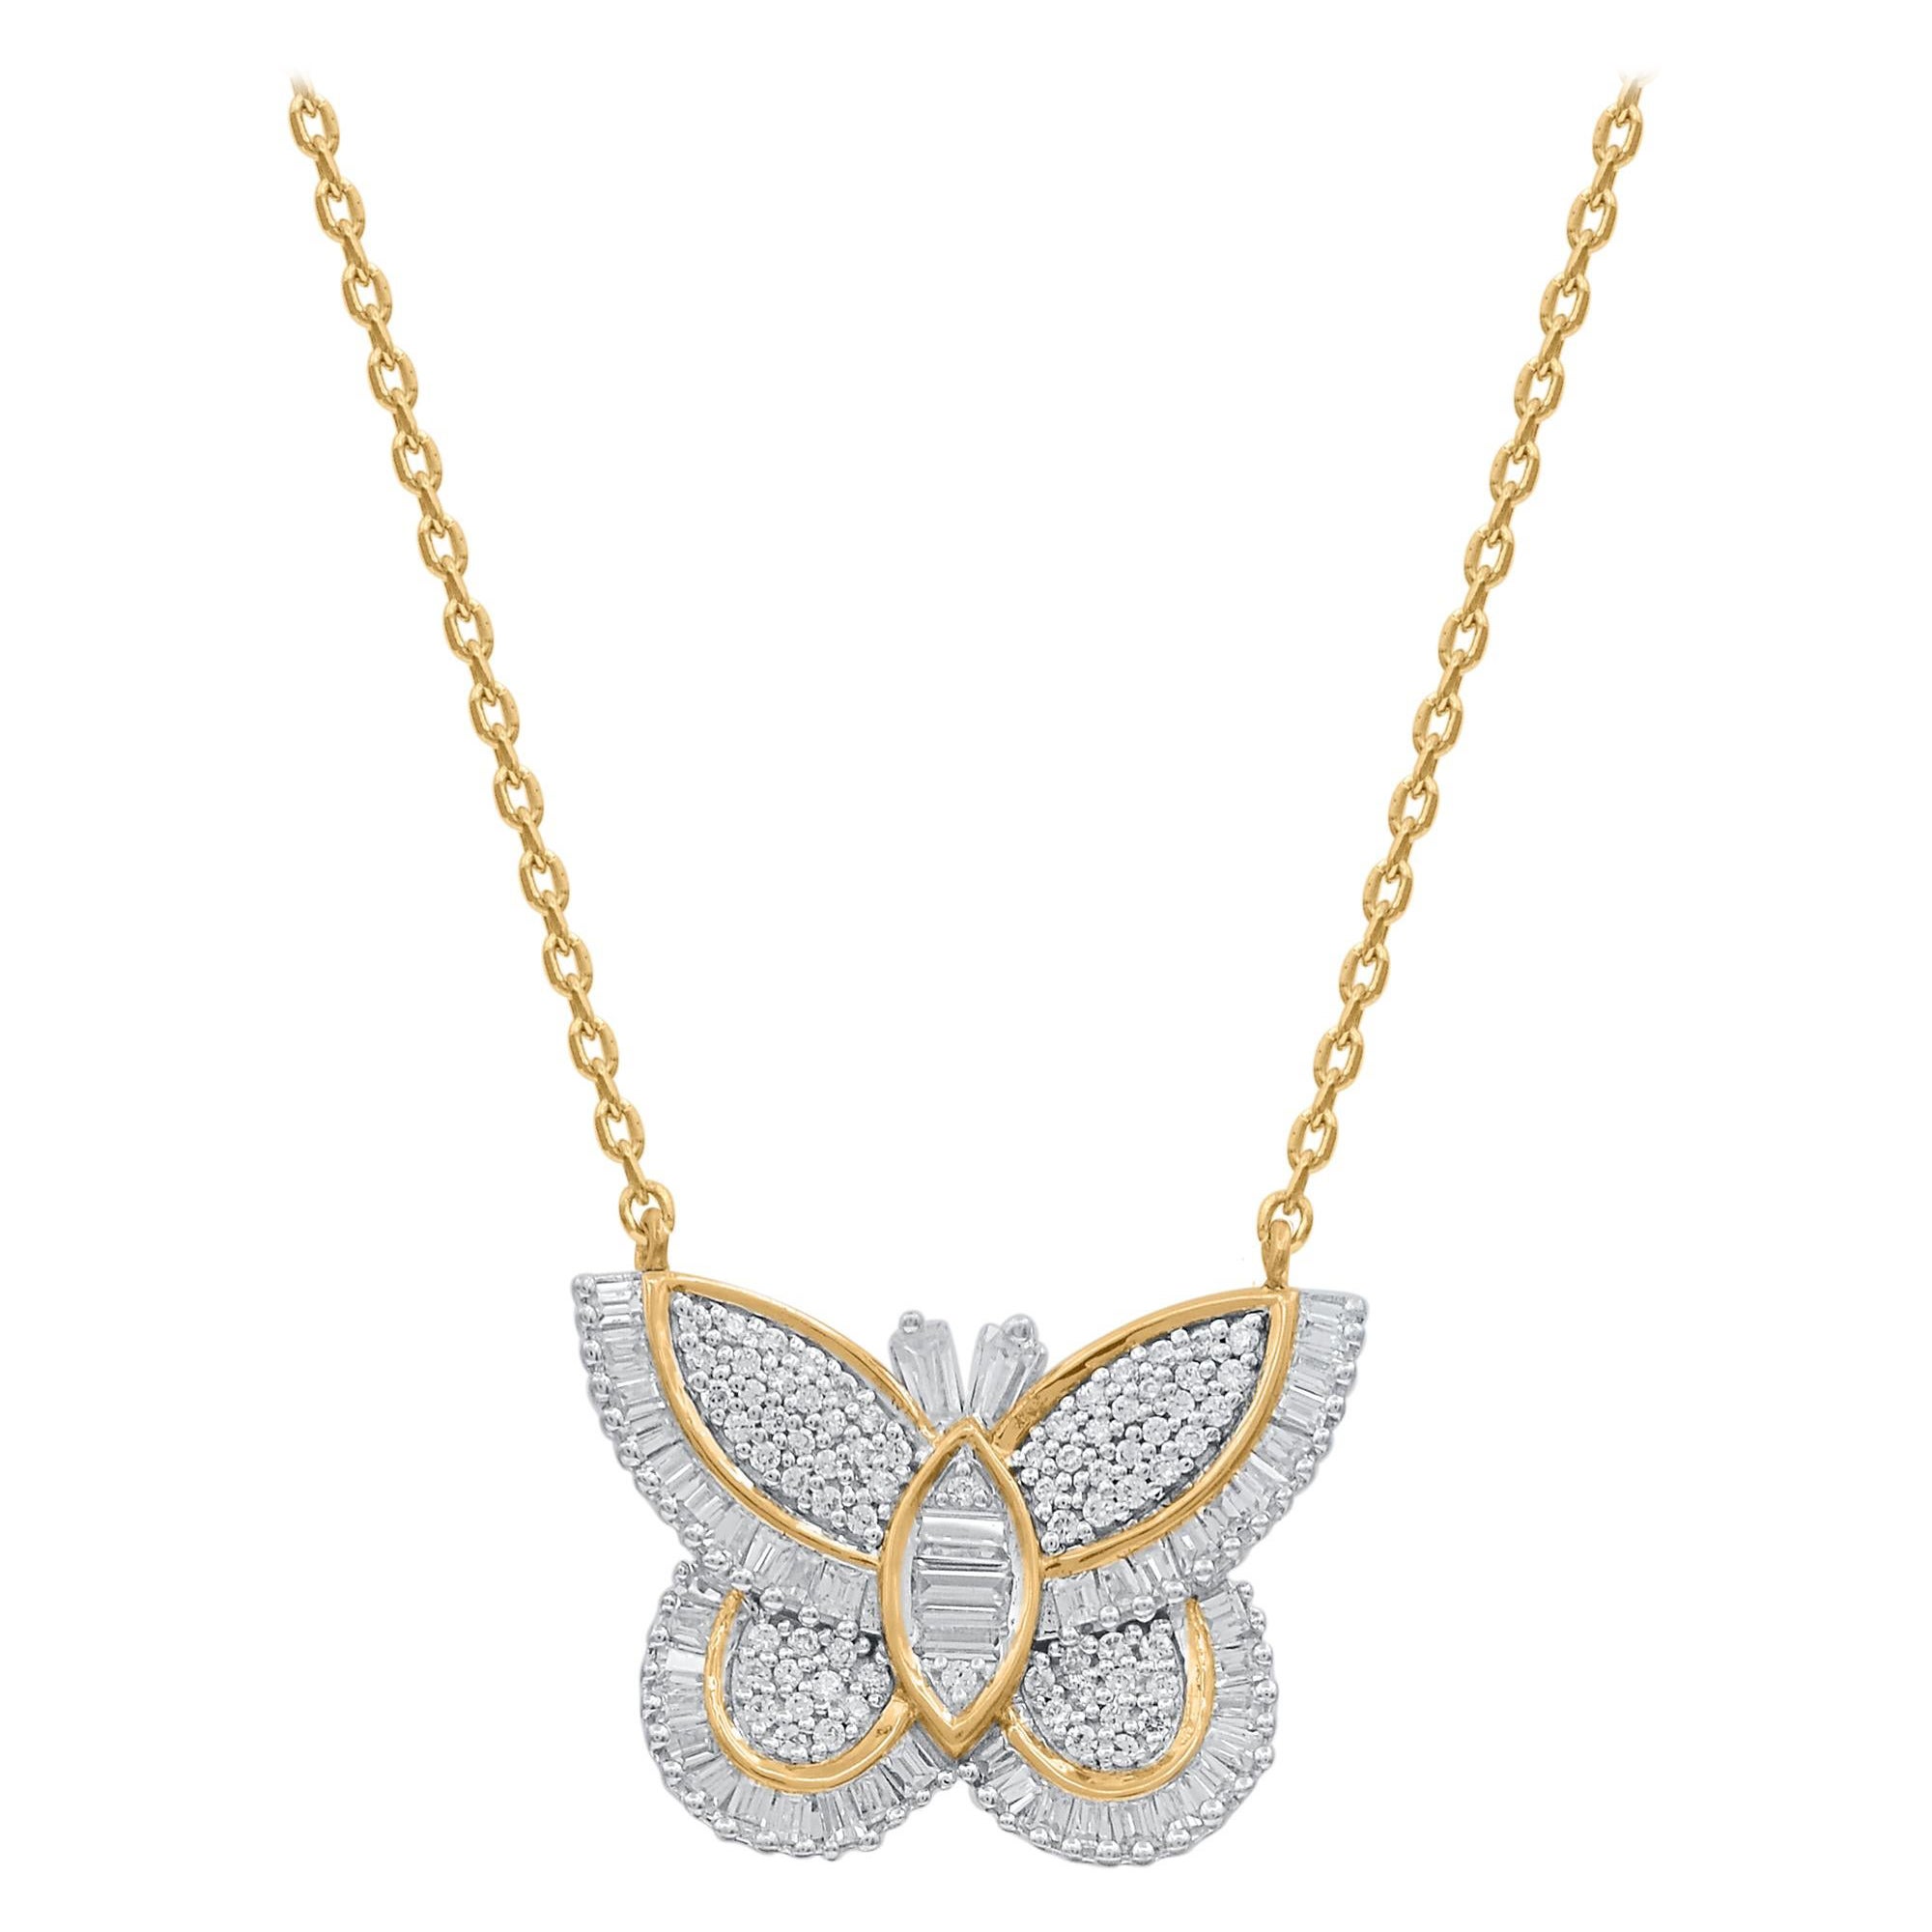 TJD 0.60 Carat Baguette Diamond Butterfly Pendant Necklace in 14KT Yellow Gold For Sale